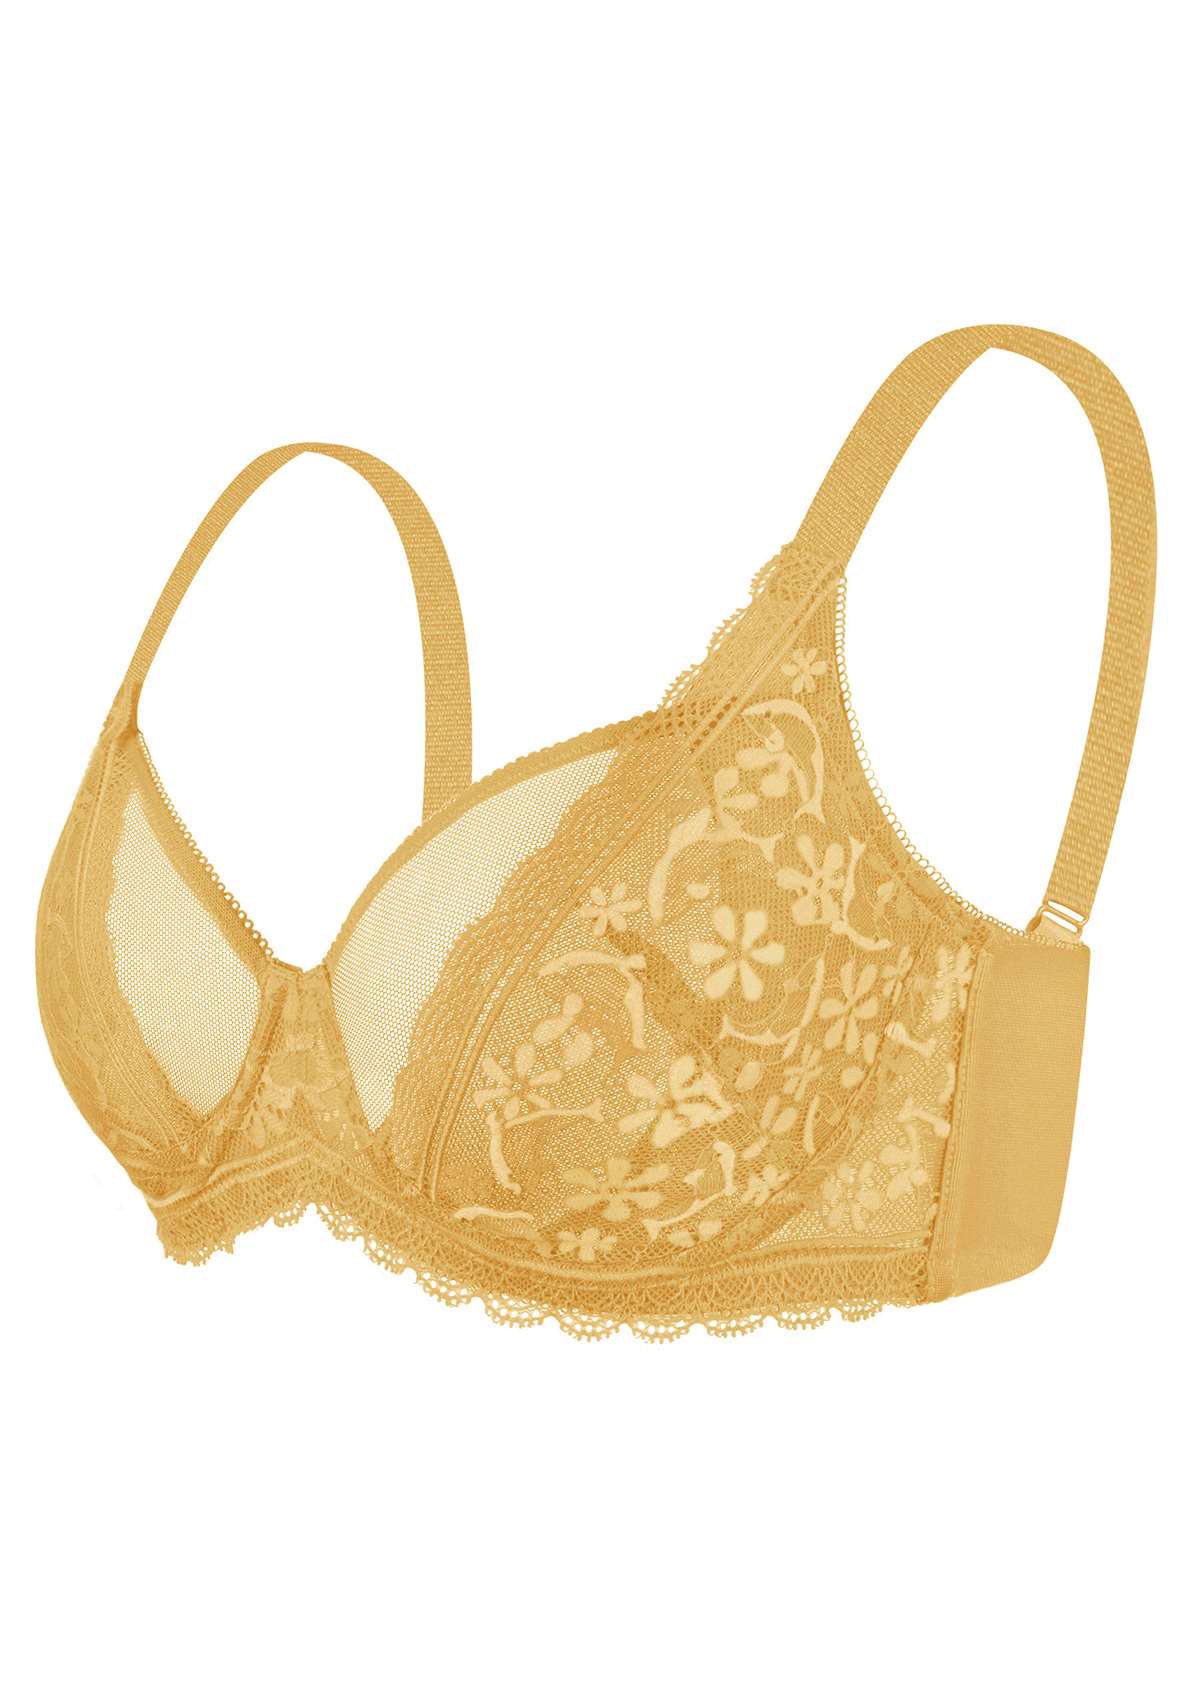 HSIA Anemone Lace Unlined Bra: Supportive, Lightweight Bra - Ginger / 36 / D